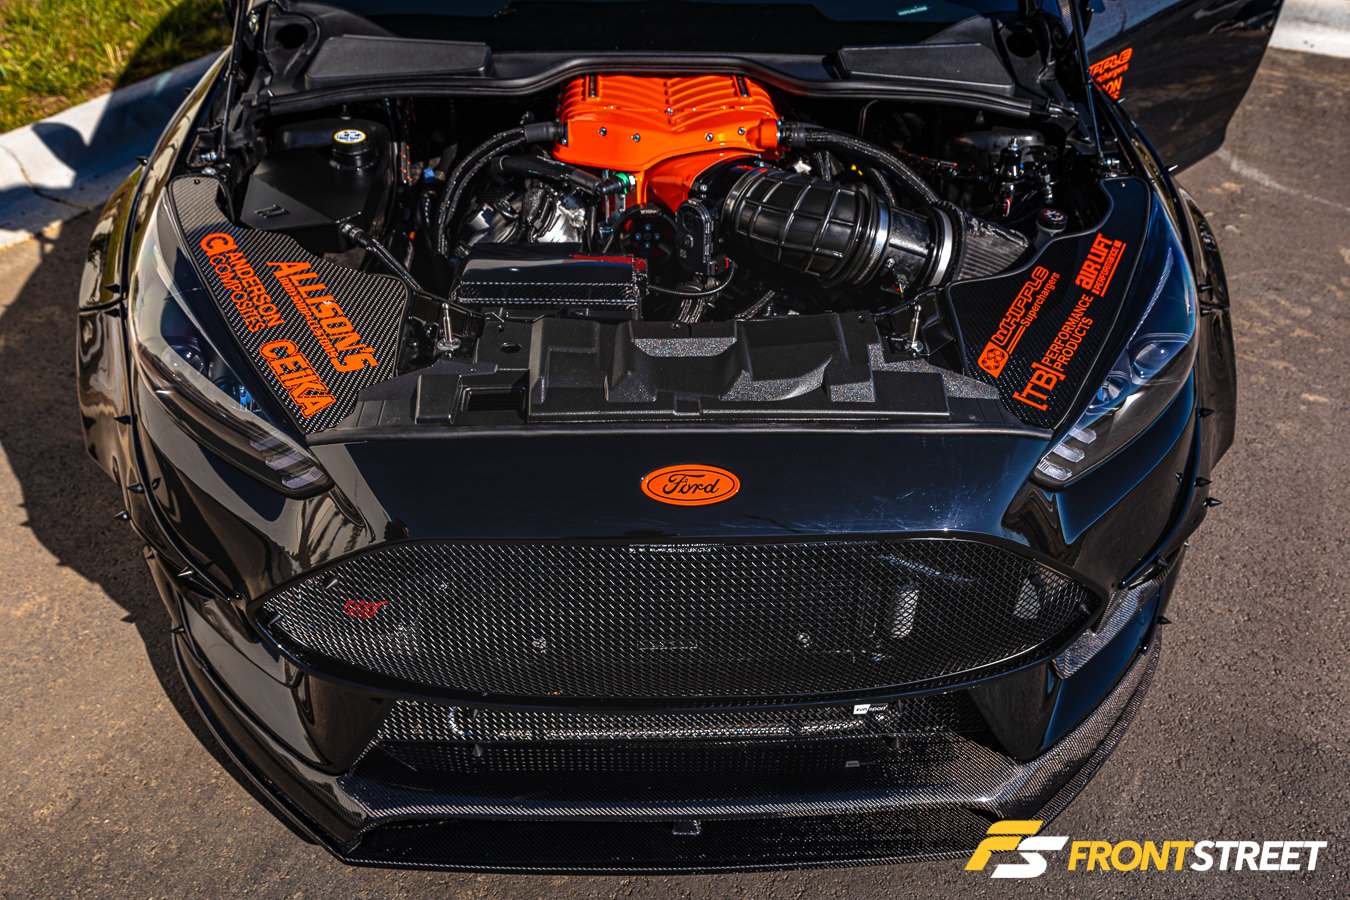 Jeremy Allison's 850whp Supercharged Coyote-Swapped RWD Focus ST Is Unforgettable